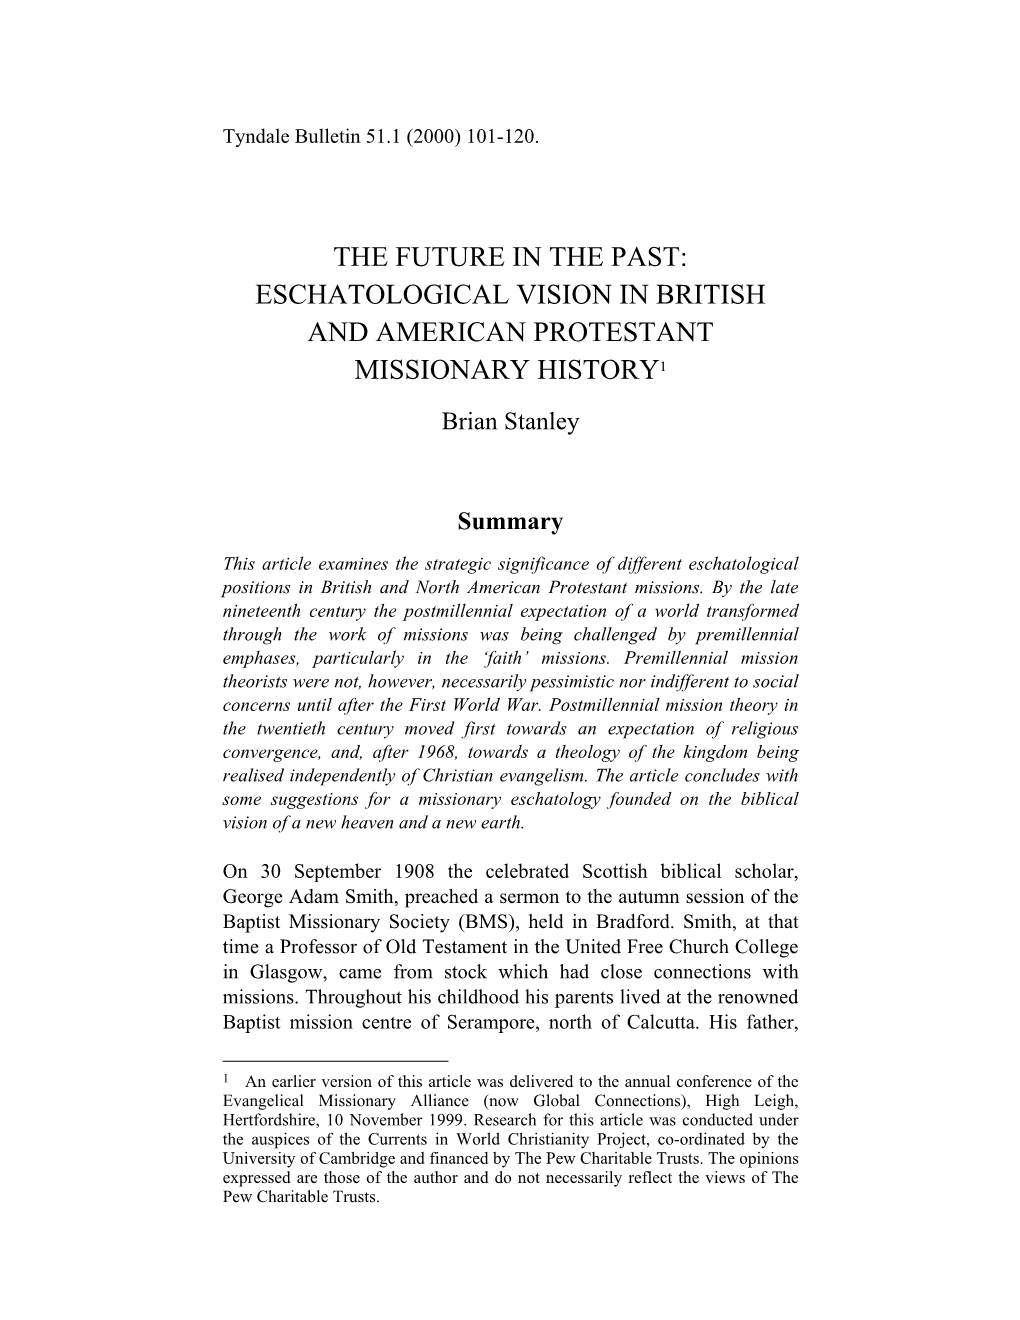 THE FUTURE in the PAST: ESCHATOLOGICAL VISION in BRITISH and AMERICAN PROTESTANT MISSIONARY HISTORY1 Brian Stanley